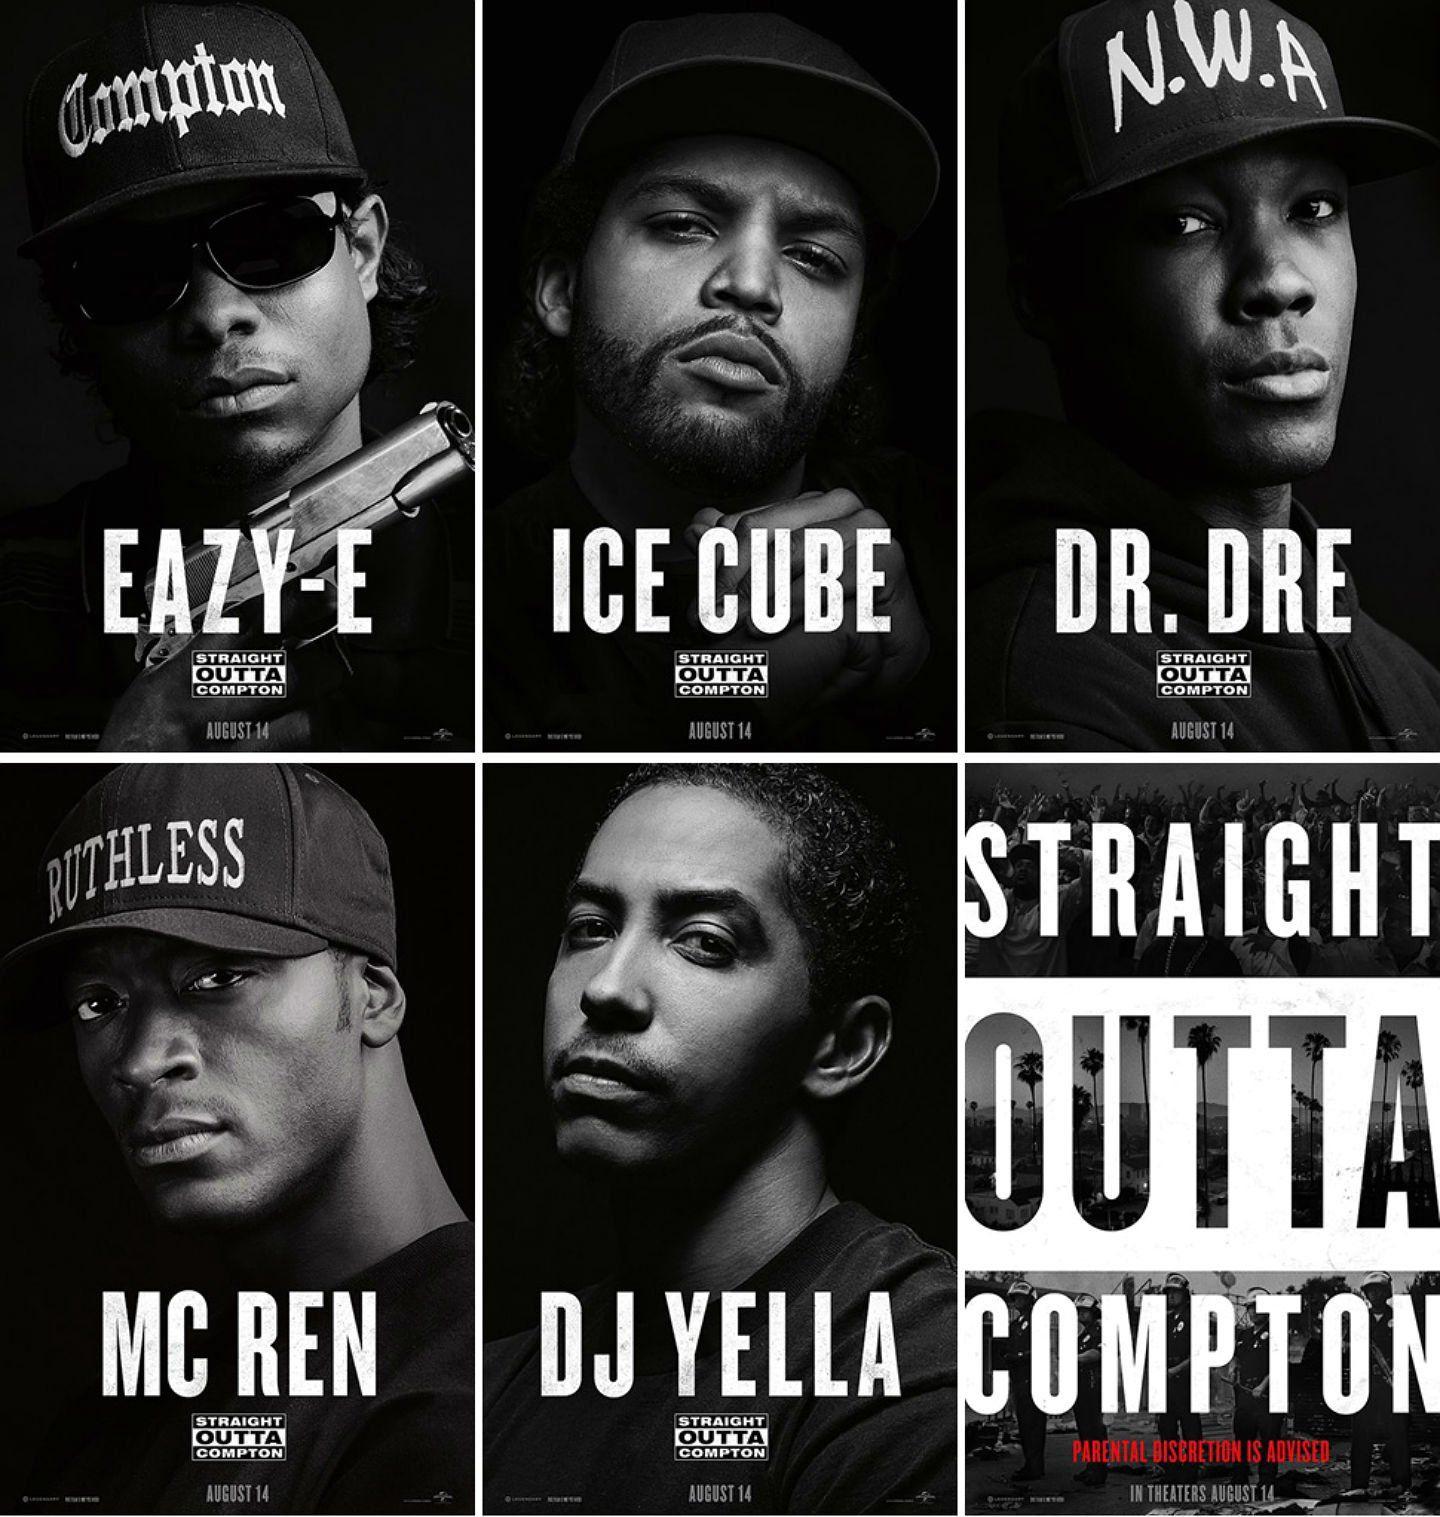 Straight Outta Compton Image  Straight Outta Compton Wallpaper Hd HD Png  Download  Transparent Png Image  PNGitem